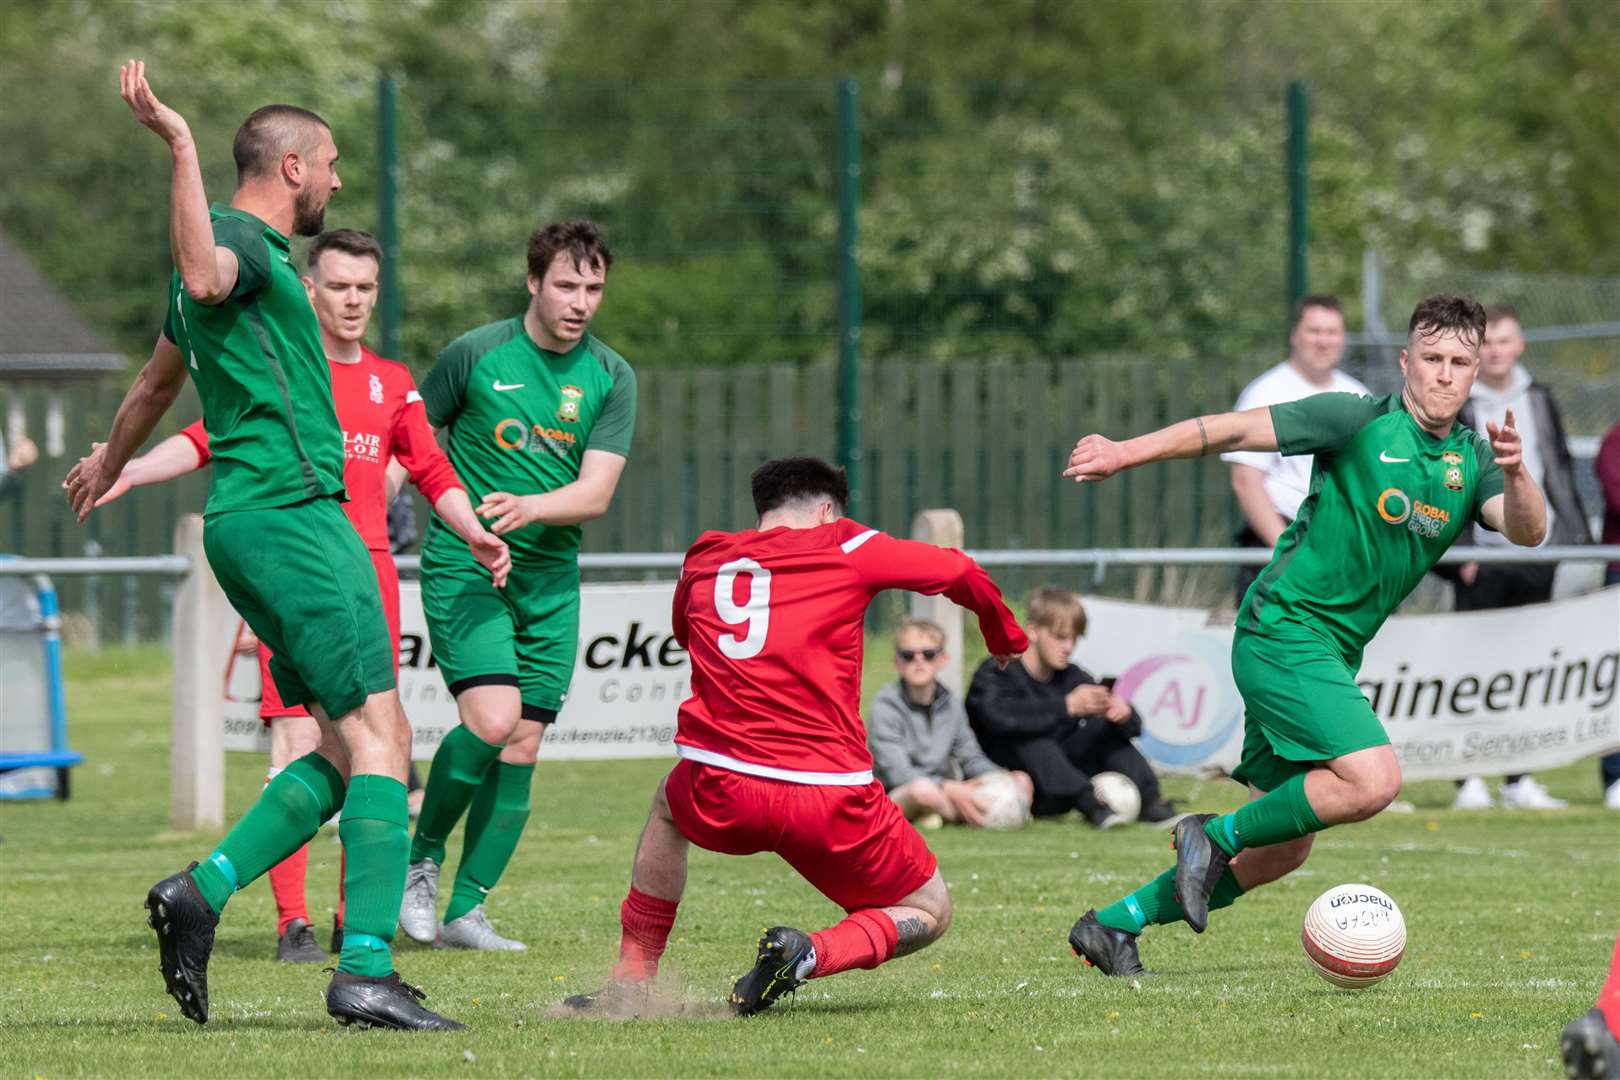 Dufftown's Michael Dunn fouls Forres' Matthew Fraser late in the second half to give away a free kick on the edge of the box...Dufftown FC (2) vs Forres Thistle FC (2) - Dufftown FC win 5-3 on penalties - Elginshire Cup Final held at Logie Park, Forres 14/05/2022...Picture: Daniel Forsyth..